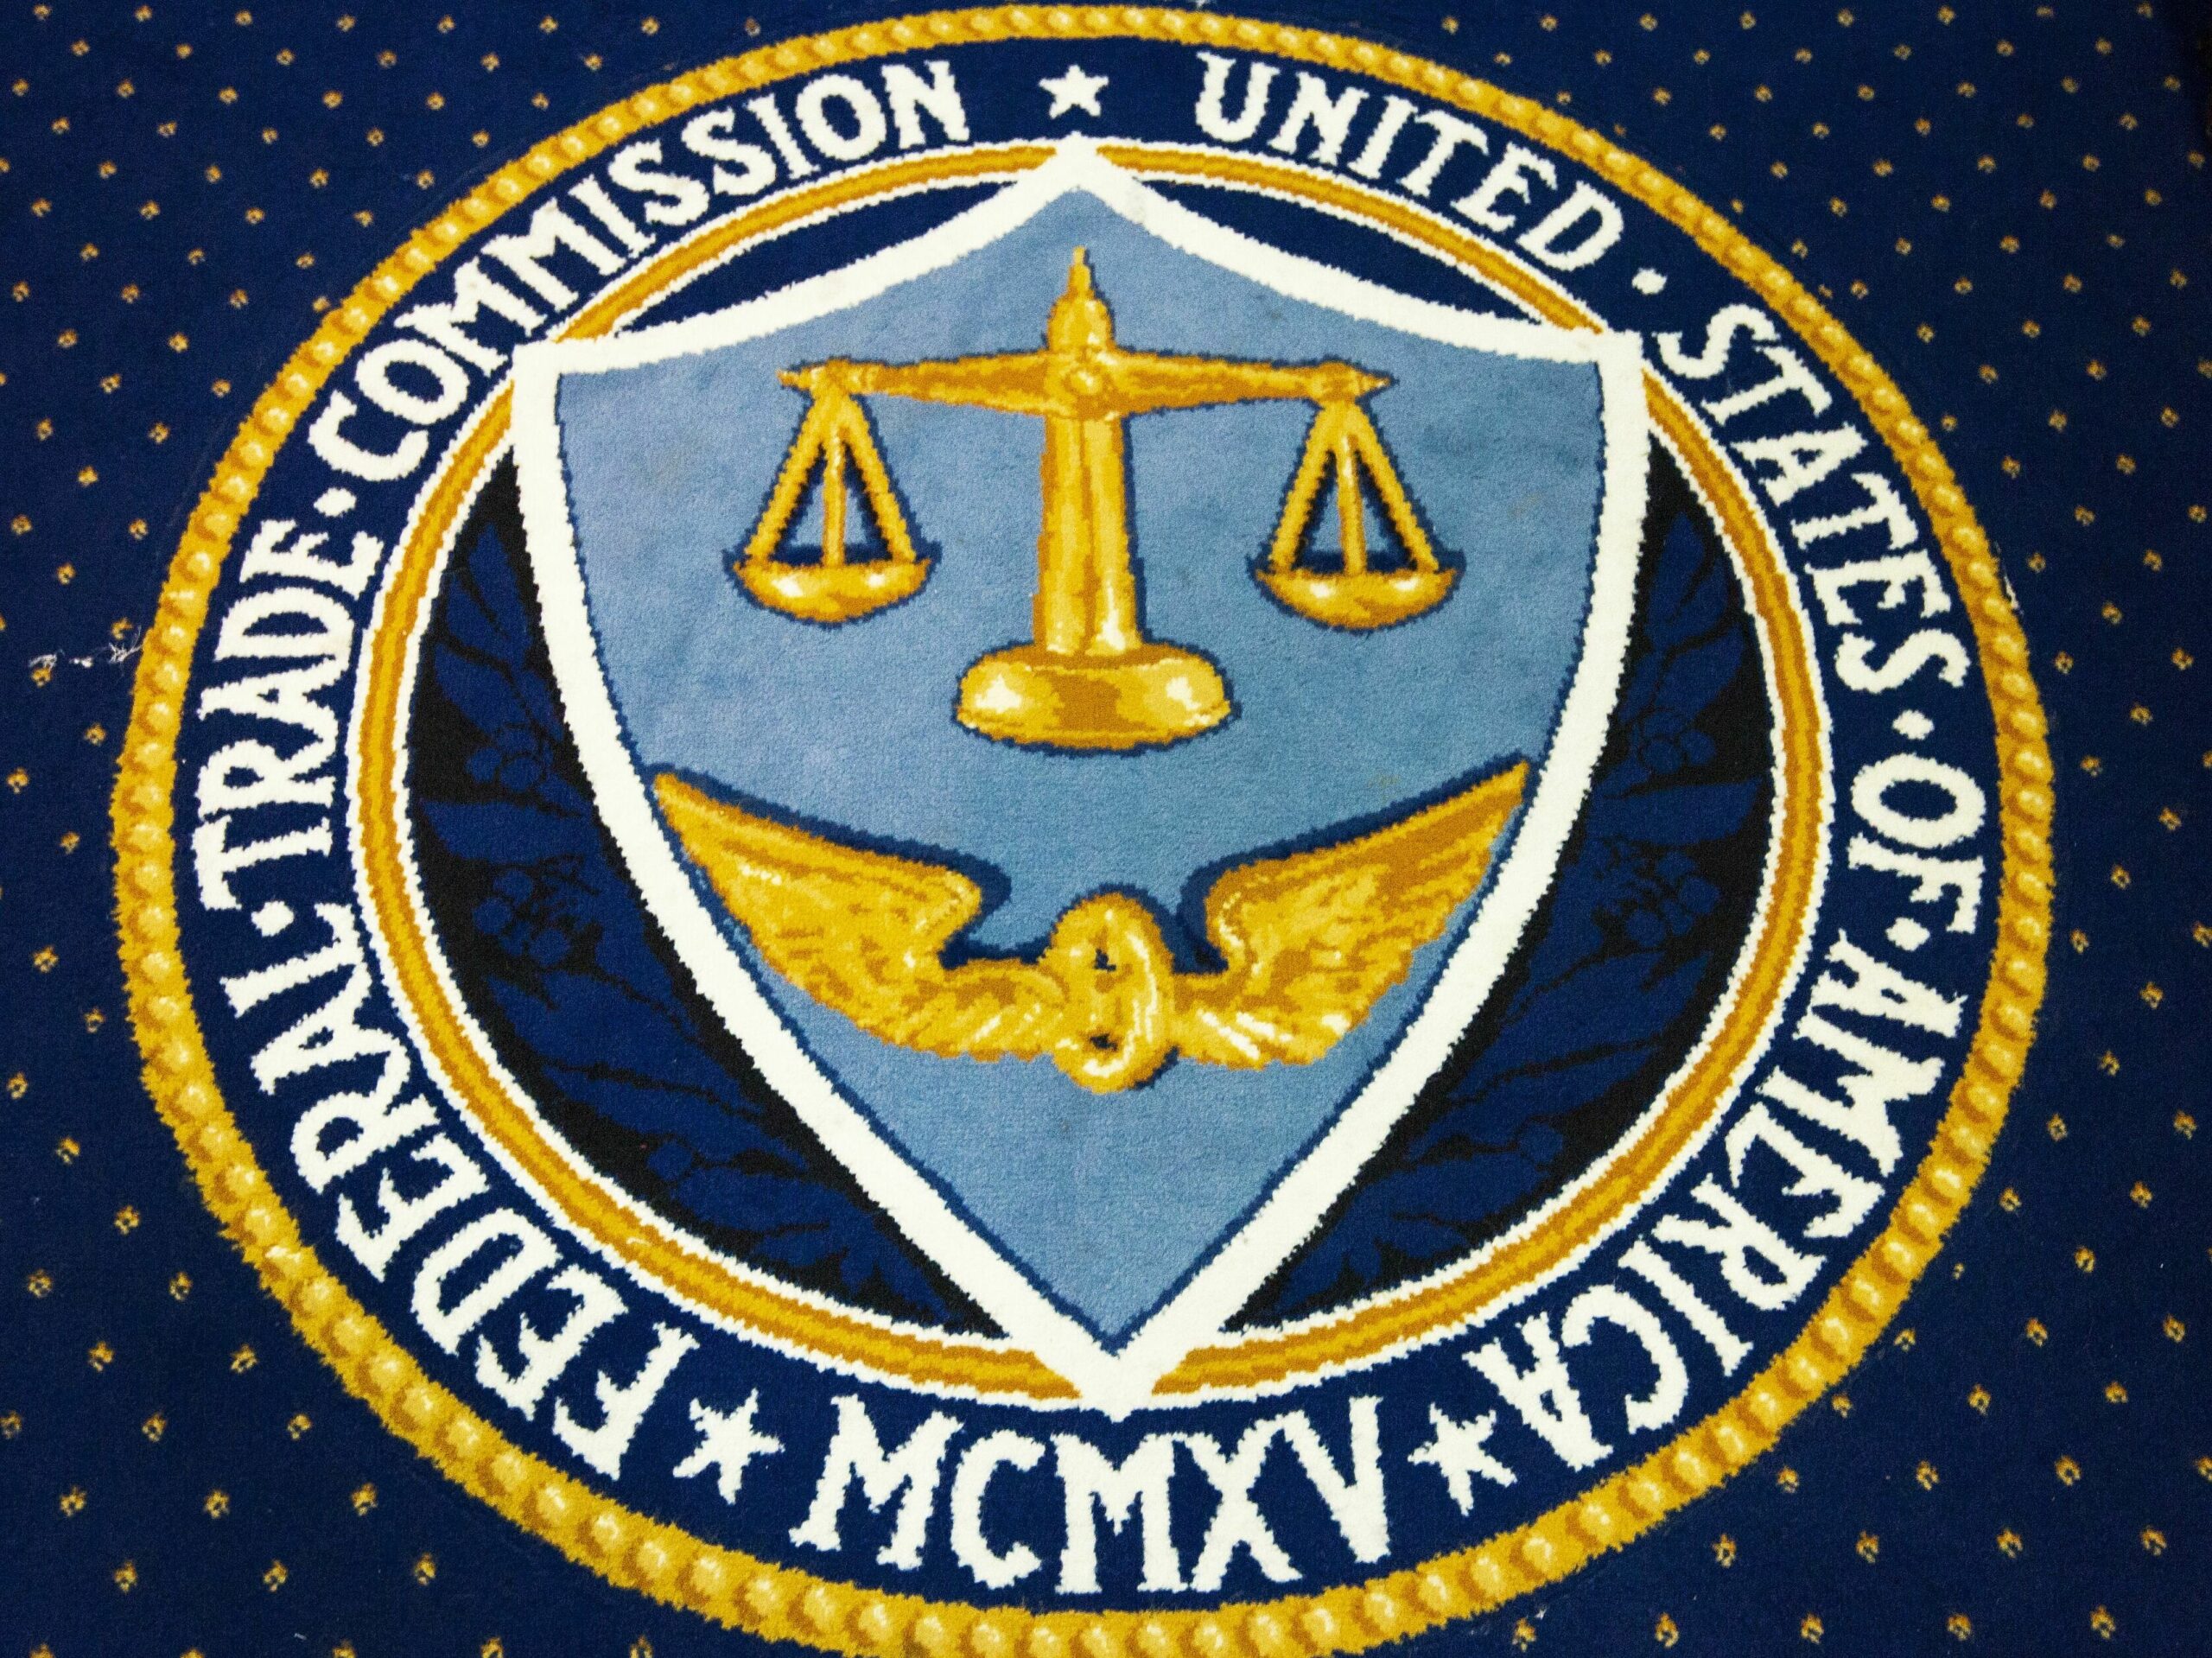 A 2014 file photo of the seal of the Federal Trade Commission in a carpet a FTC headquarters in Washington, DC. The organization is trying to raise consumer awareness about the use of artificial intelligence tools to create convincing audio deepfakes.